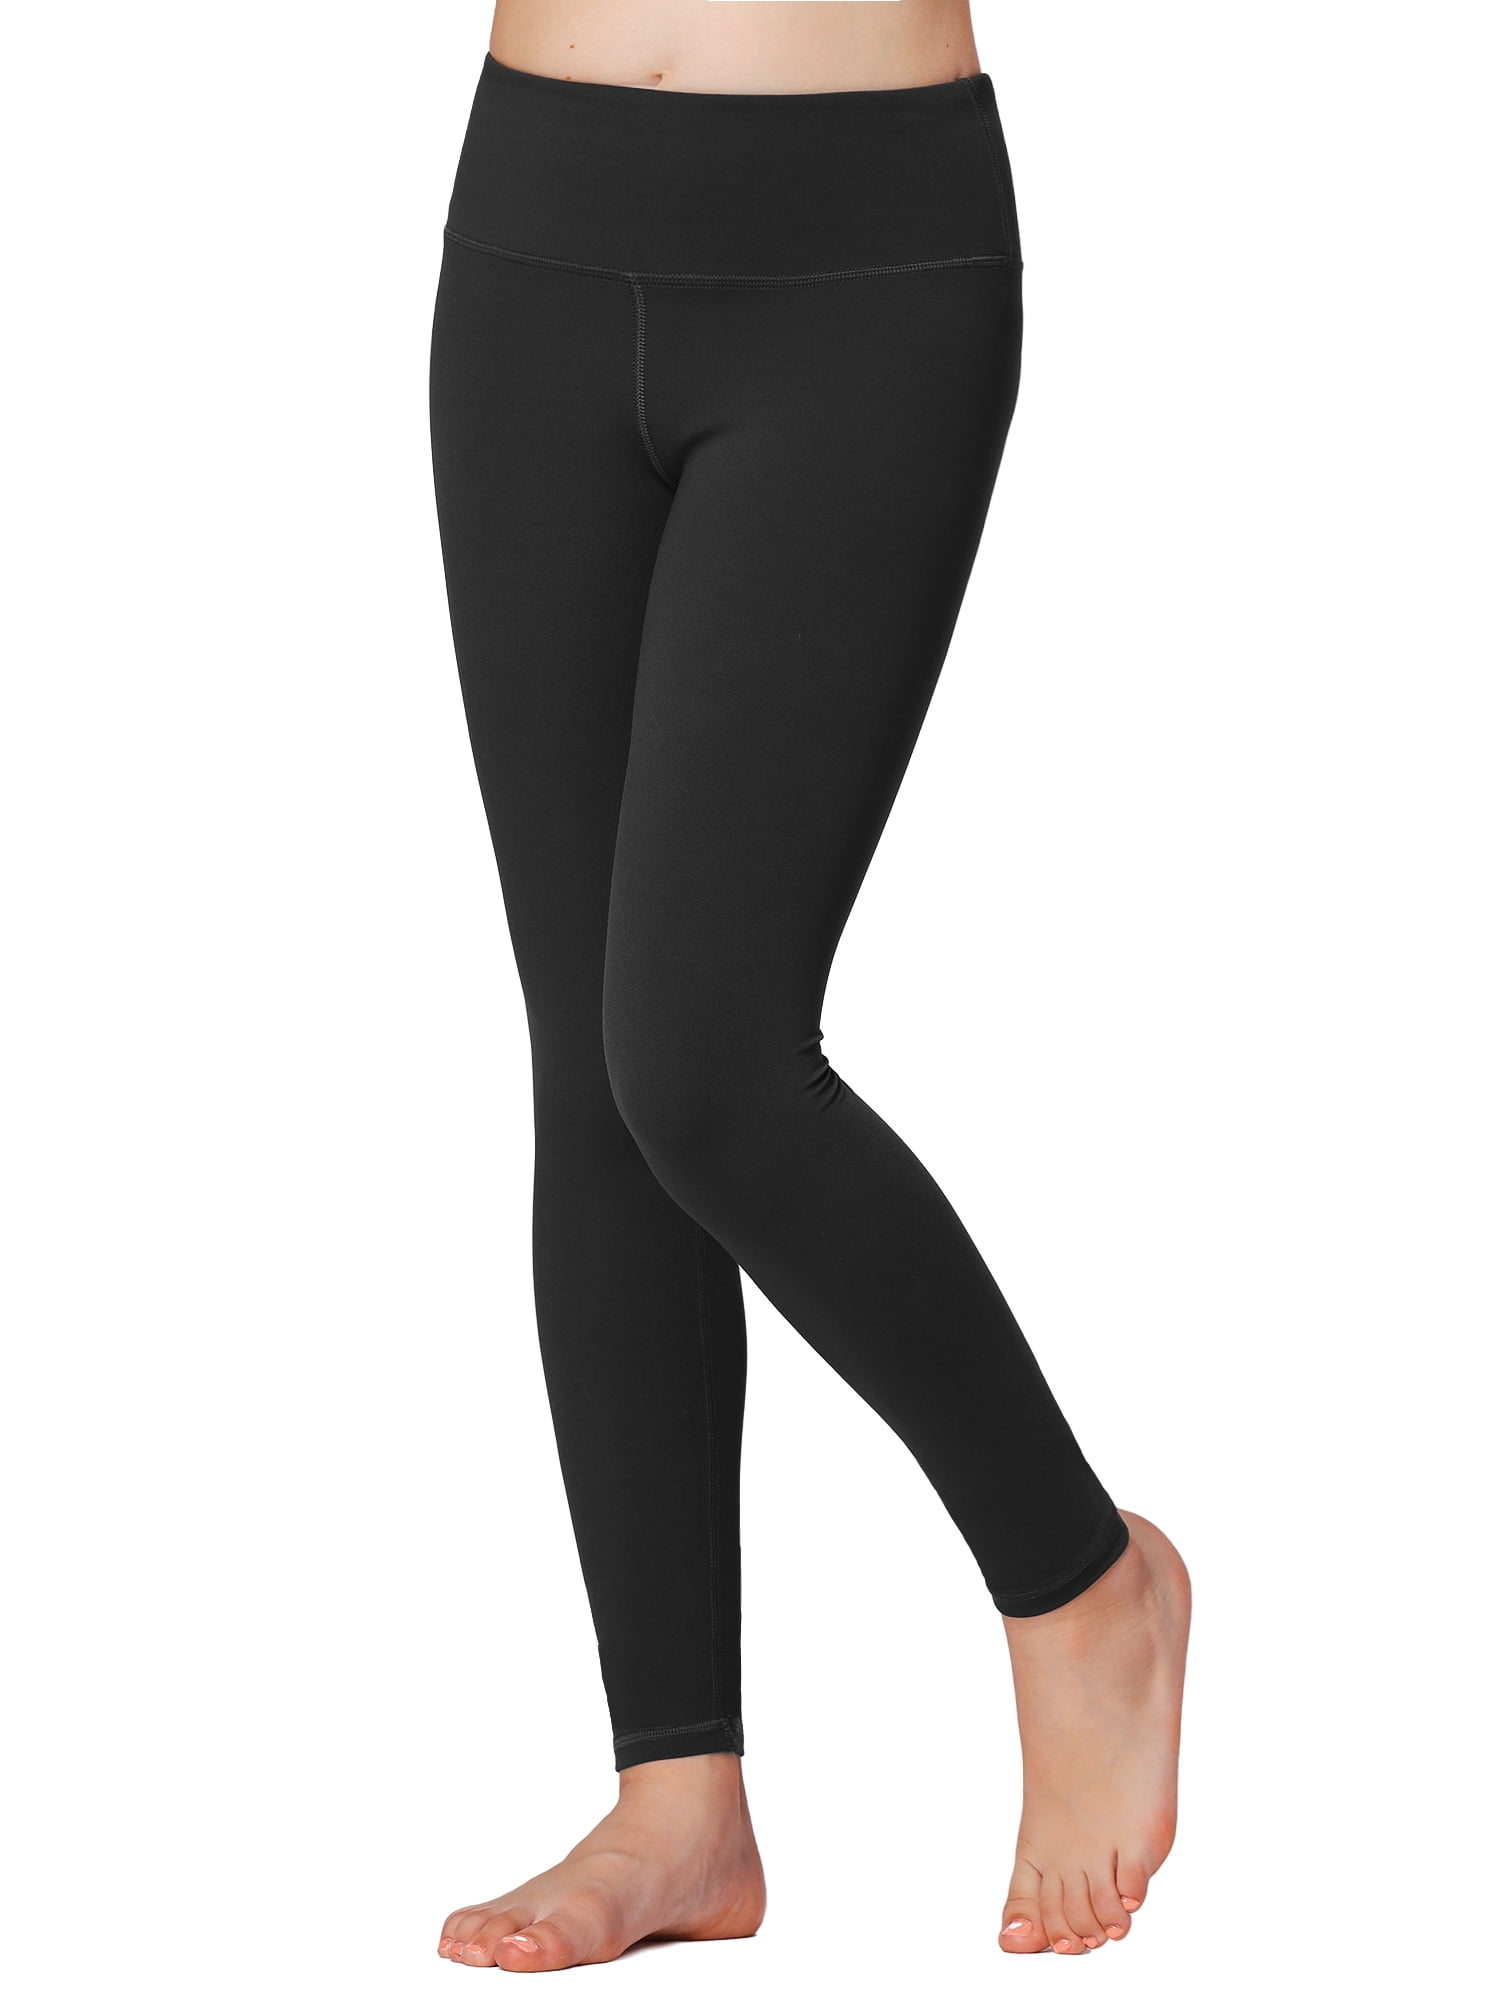 Aggregate 211+ black athletic leggings with pockets best